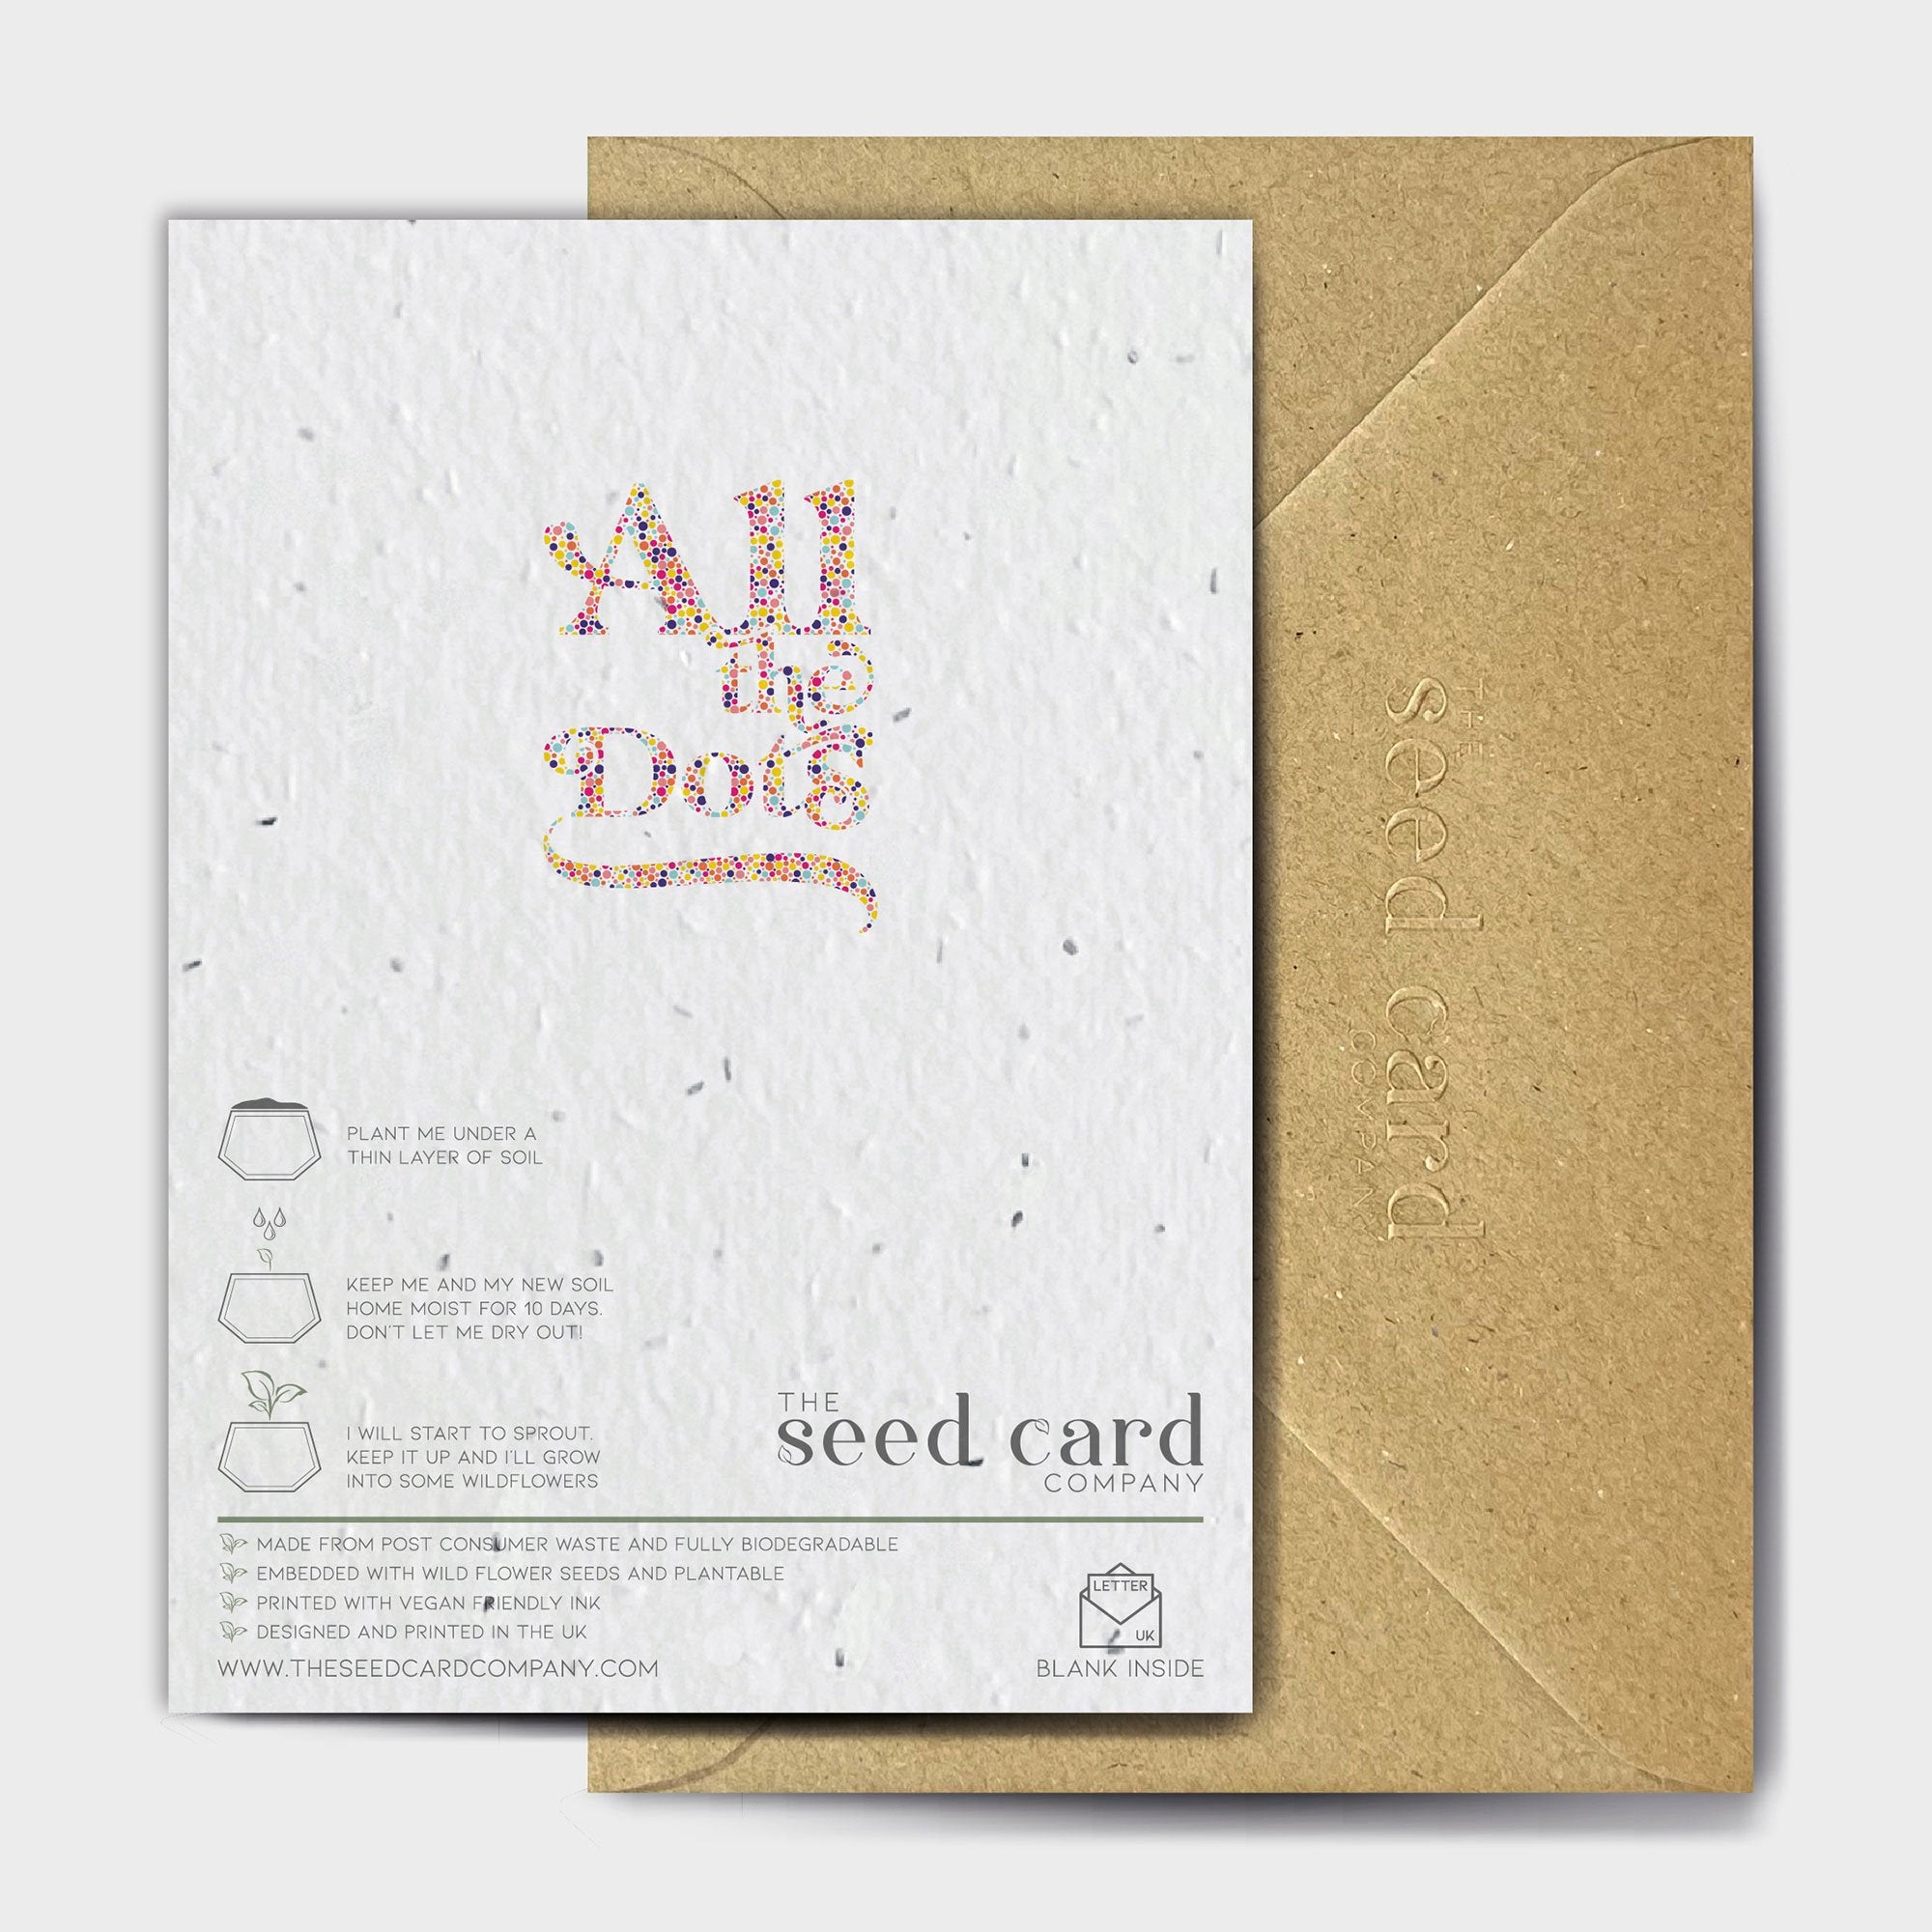 Shop online All the Dotty Languages - 100% biodegradable seed-embedded cards Shop -The Seed Card Company